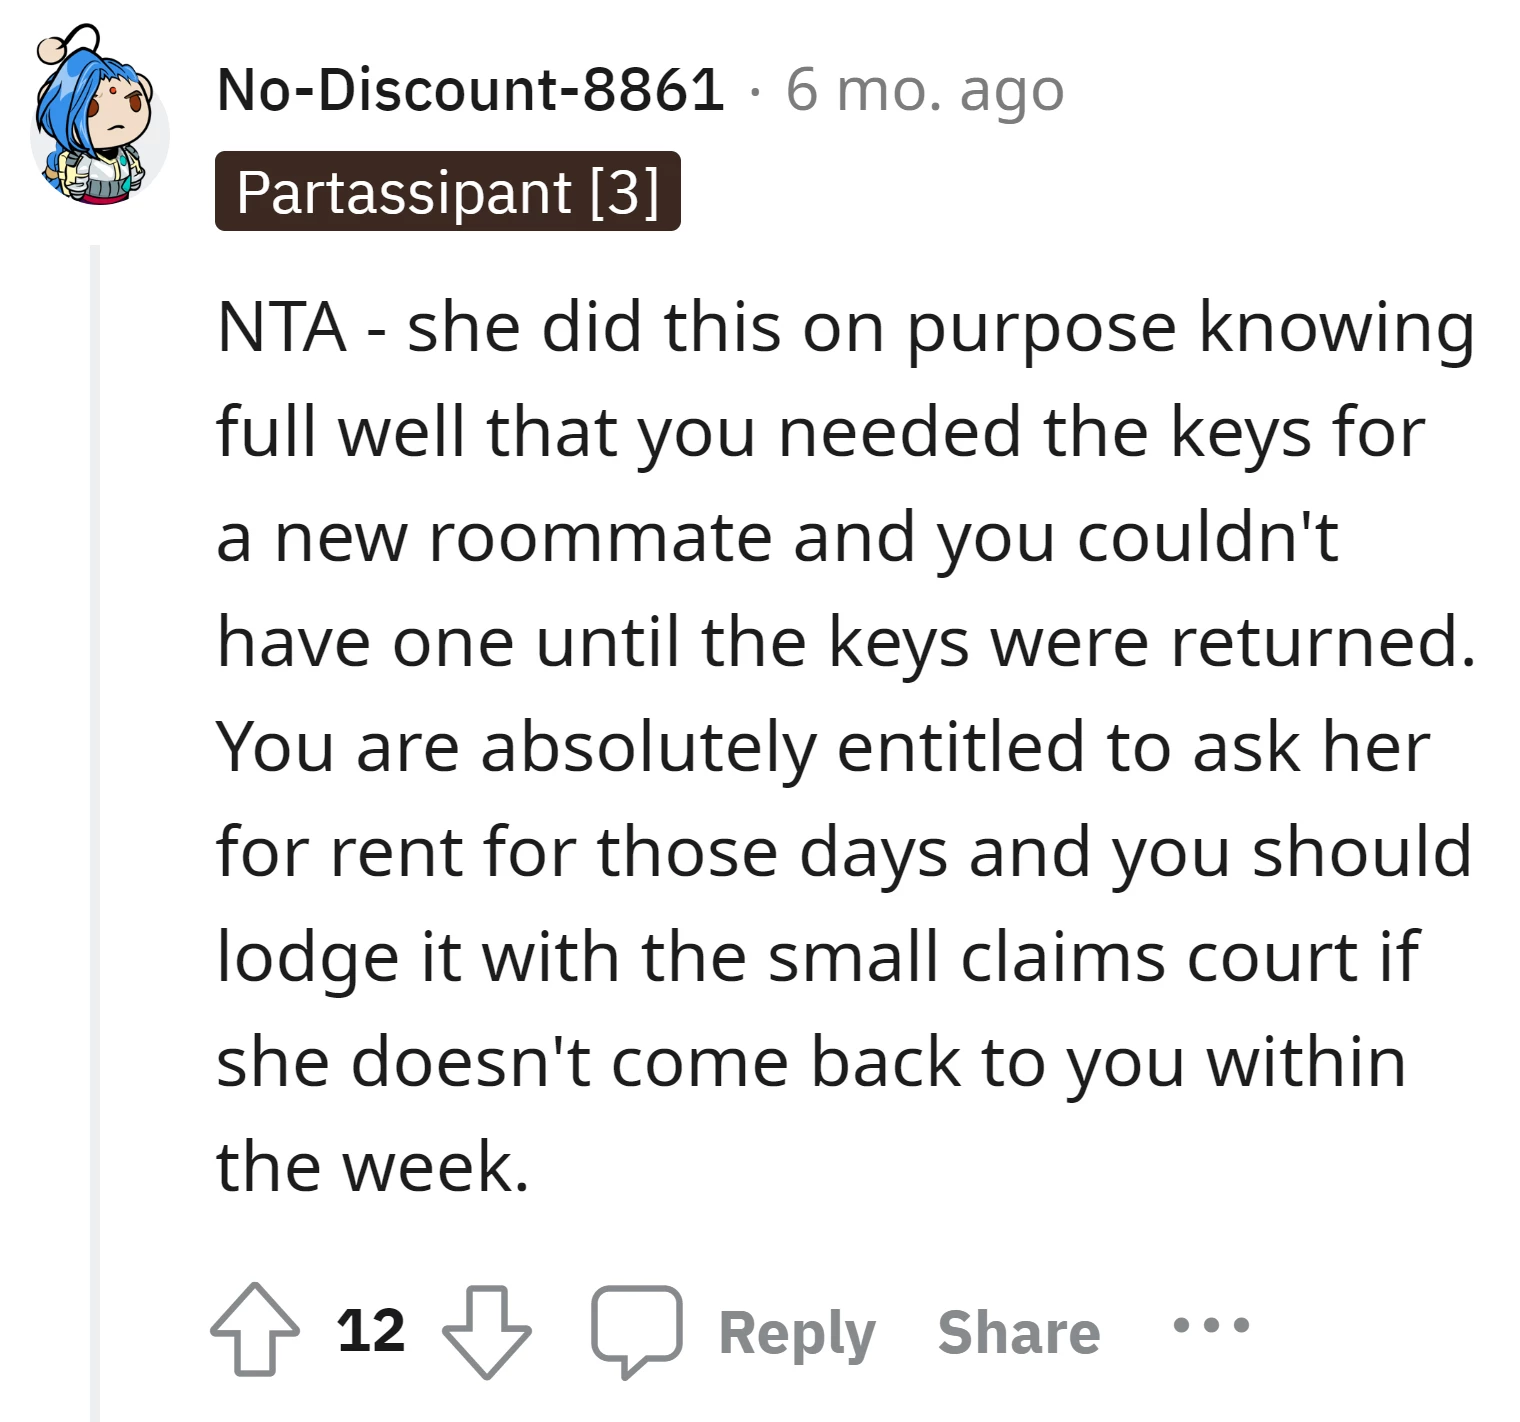 The ex-roommate's intentional delay in returning the keys justifies the request for rent